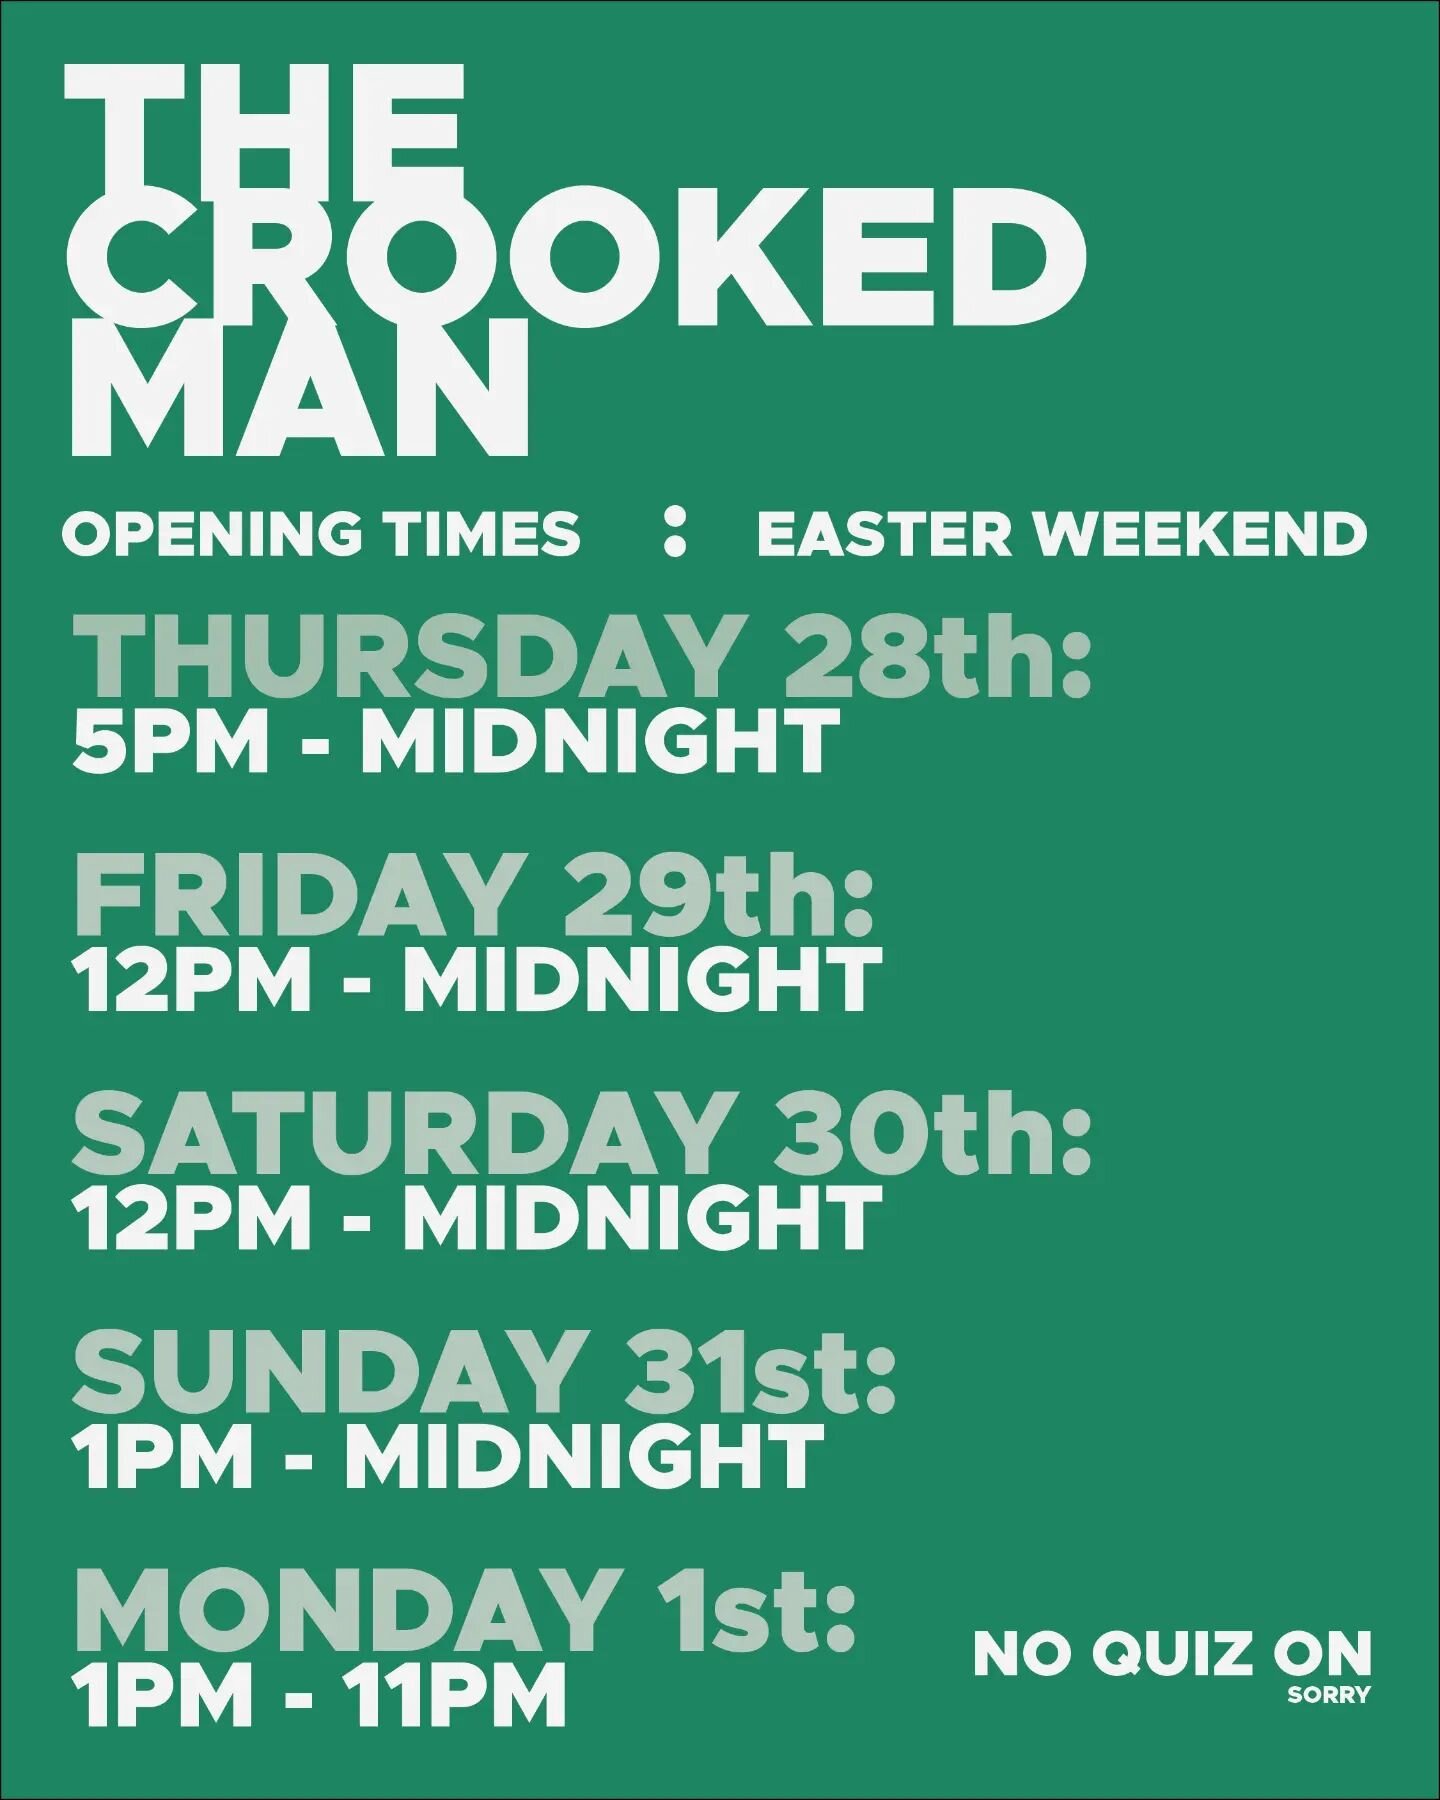 Important news folks.
Easter weekend opening hours are here.
#easterweekend